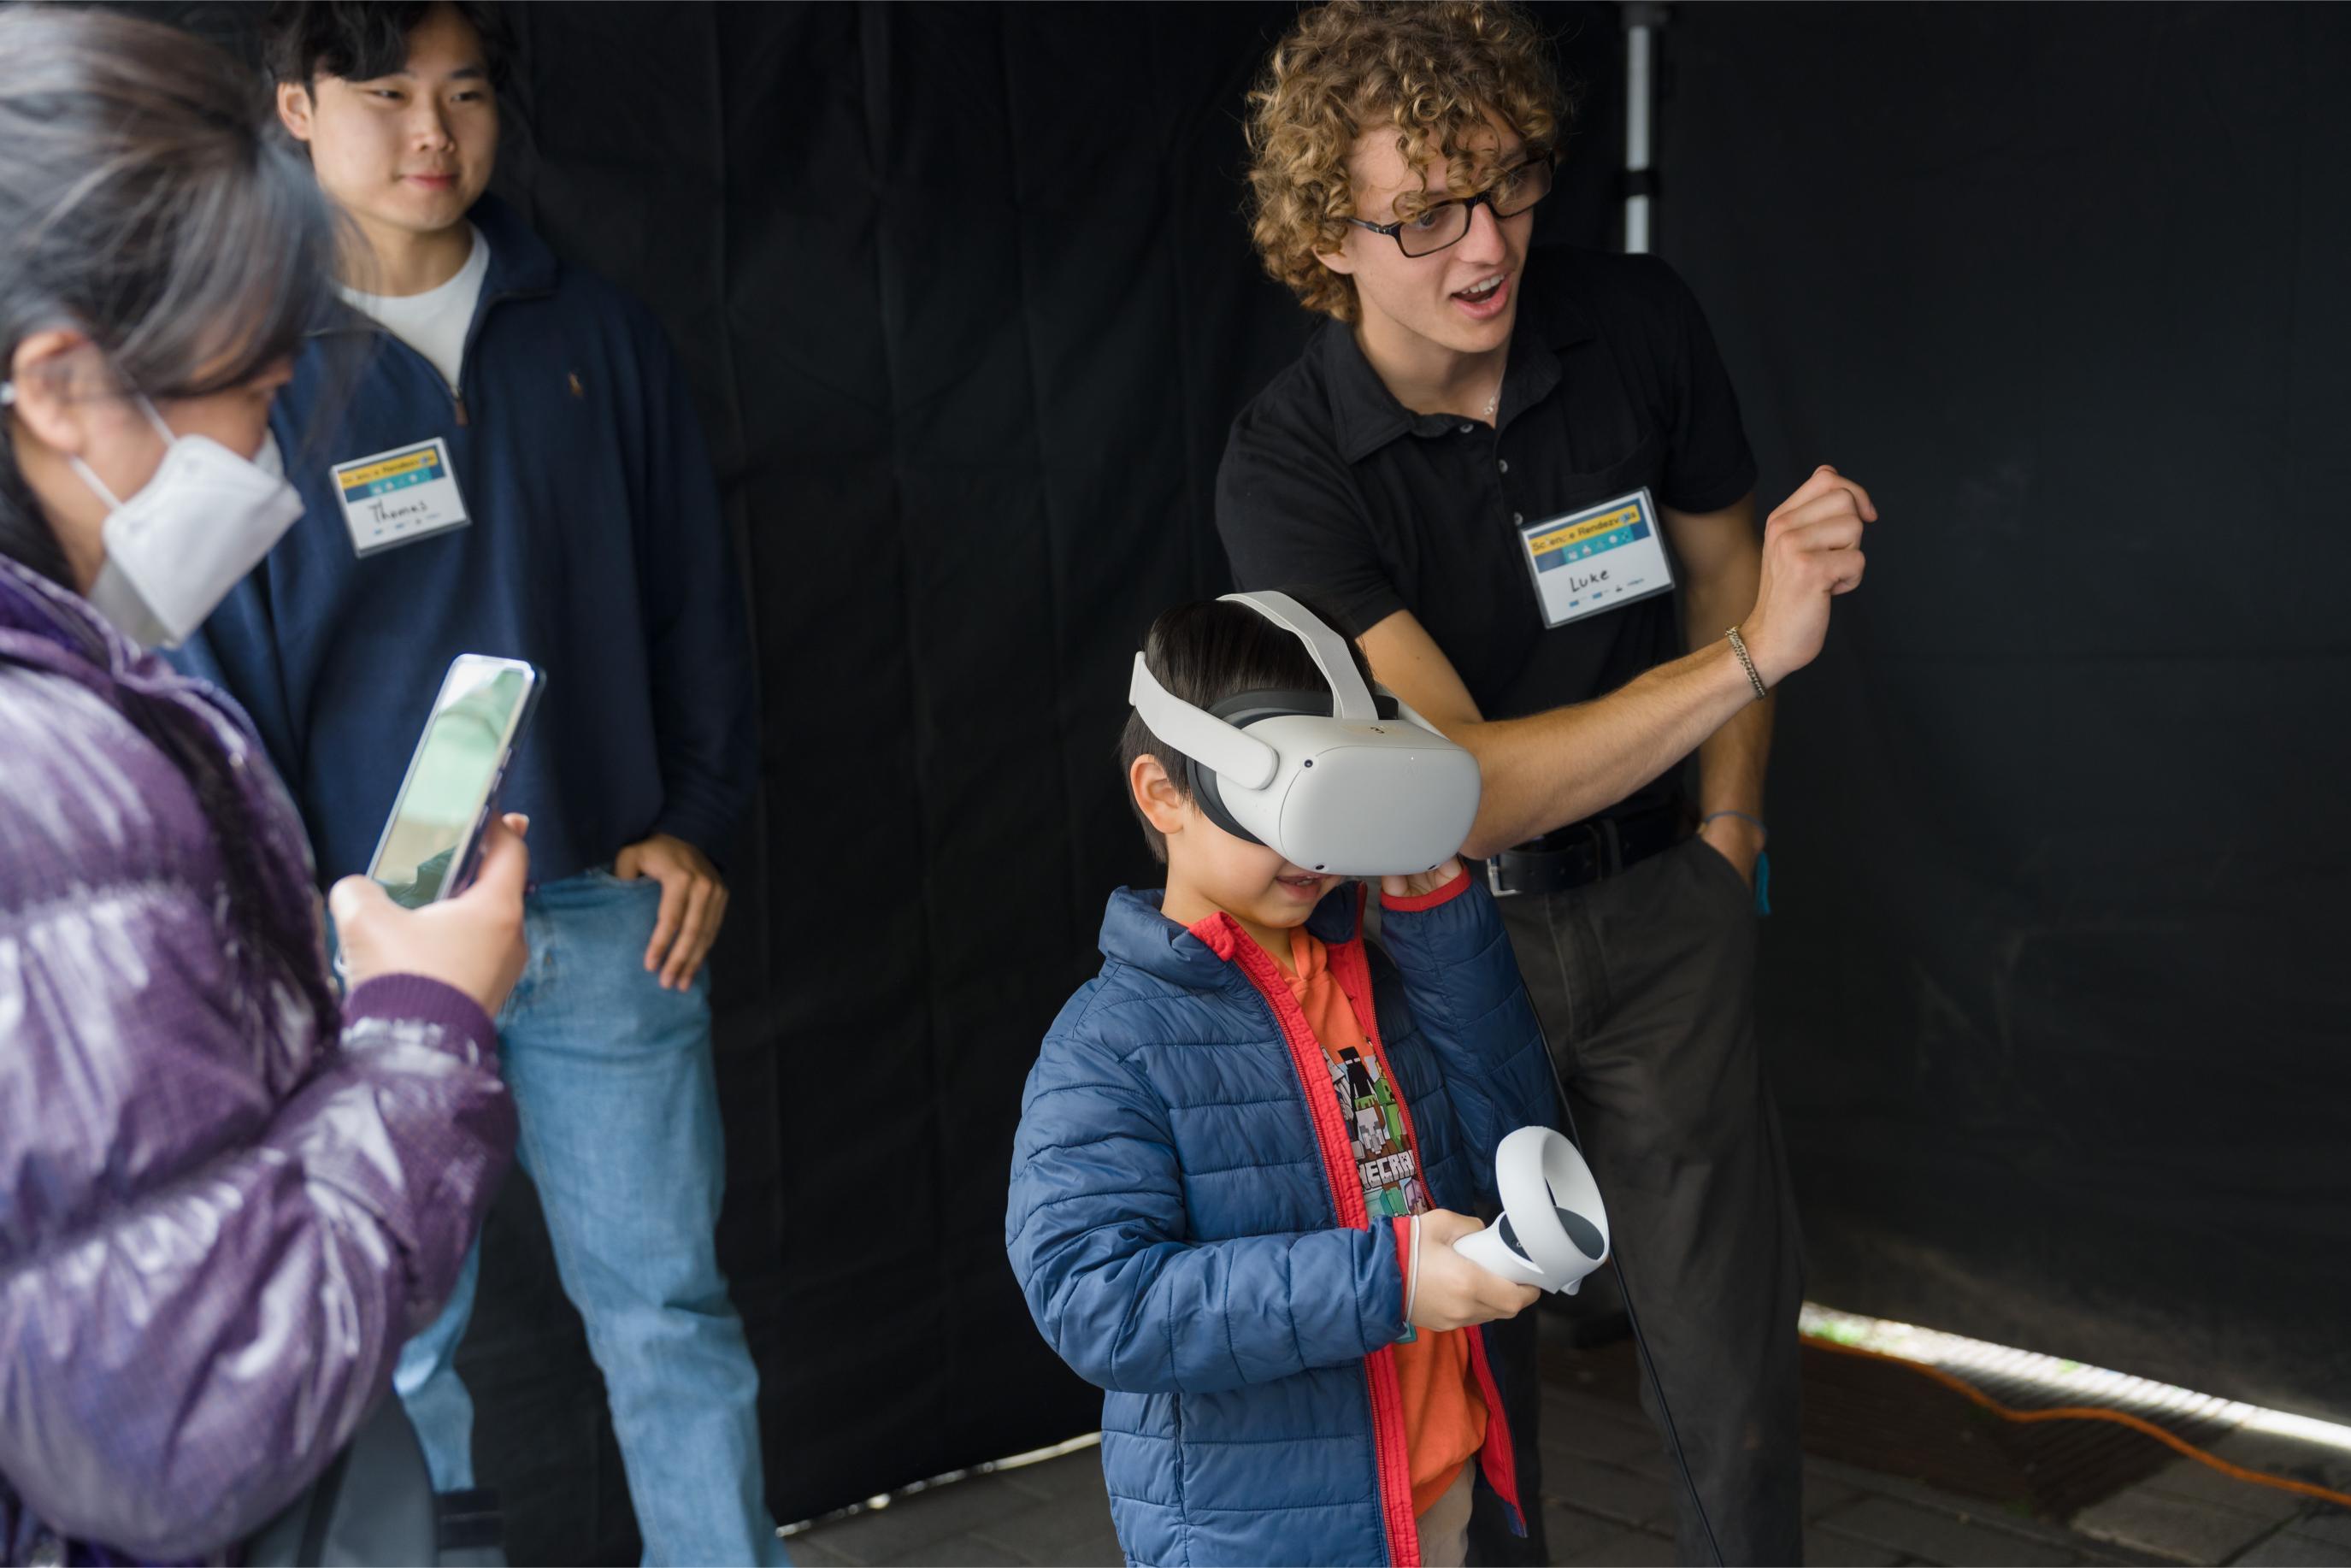 A volunteer shows the young participant how to play the game at the Virtual Reality Games Booth.